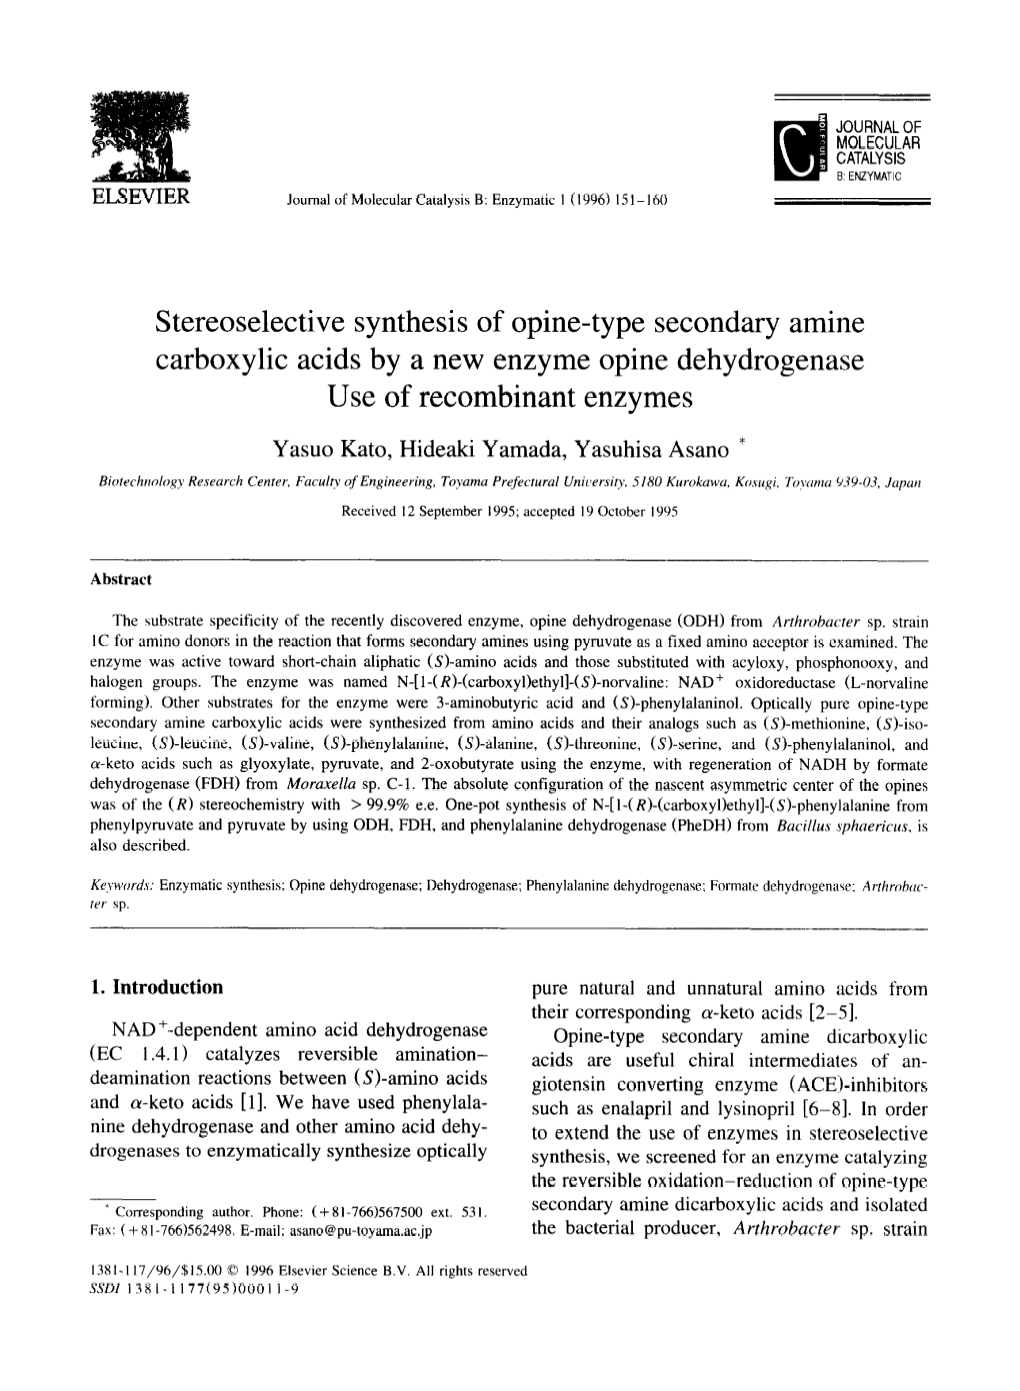 Stereoselective Synthesis of Opine-Type Secondary Amine Carboxylic Acids by a New Enzyme Opine Dehydrogenase Use of Recombinant Enzymes